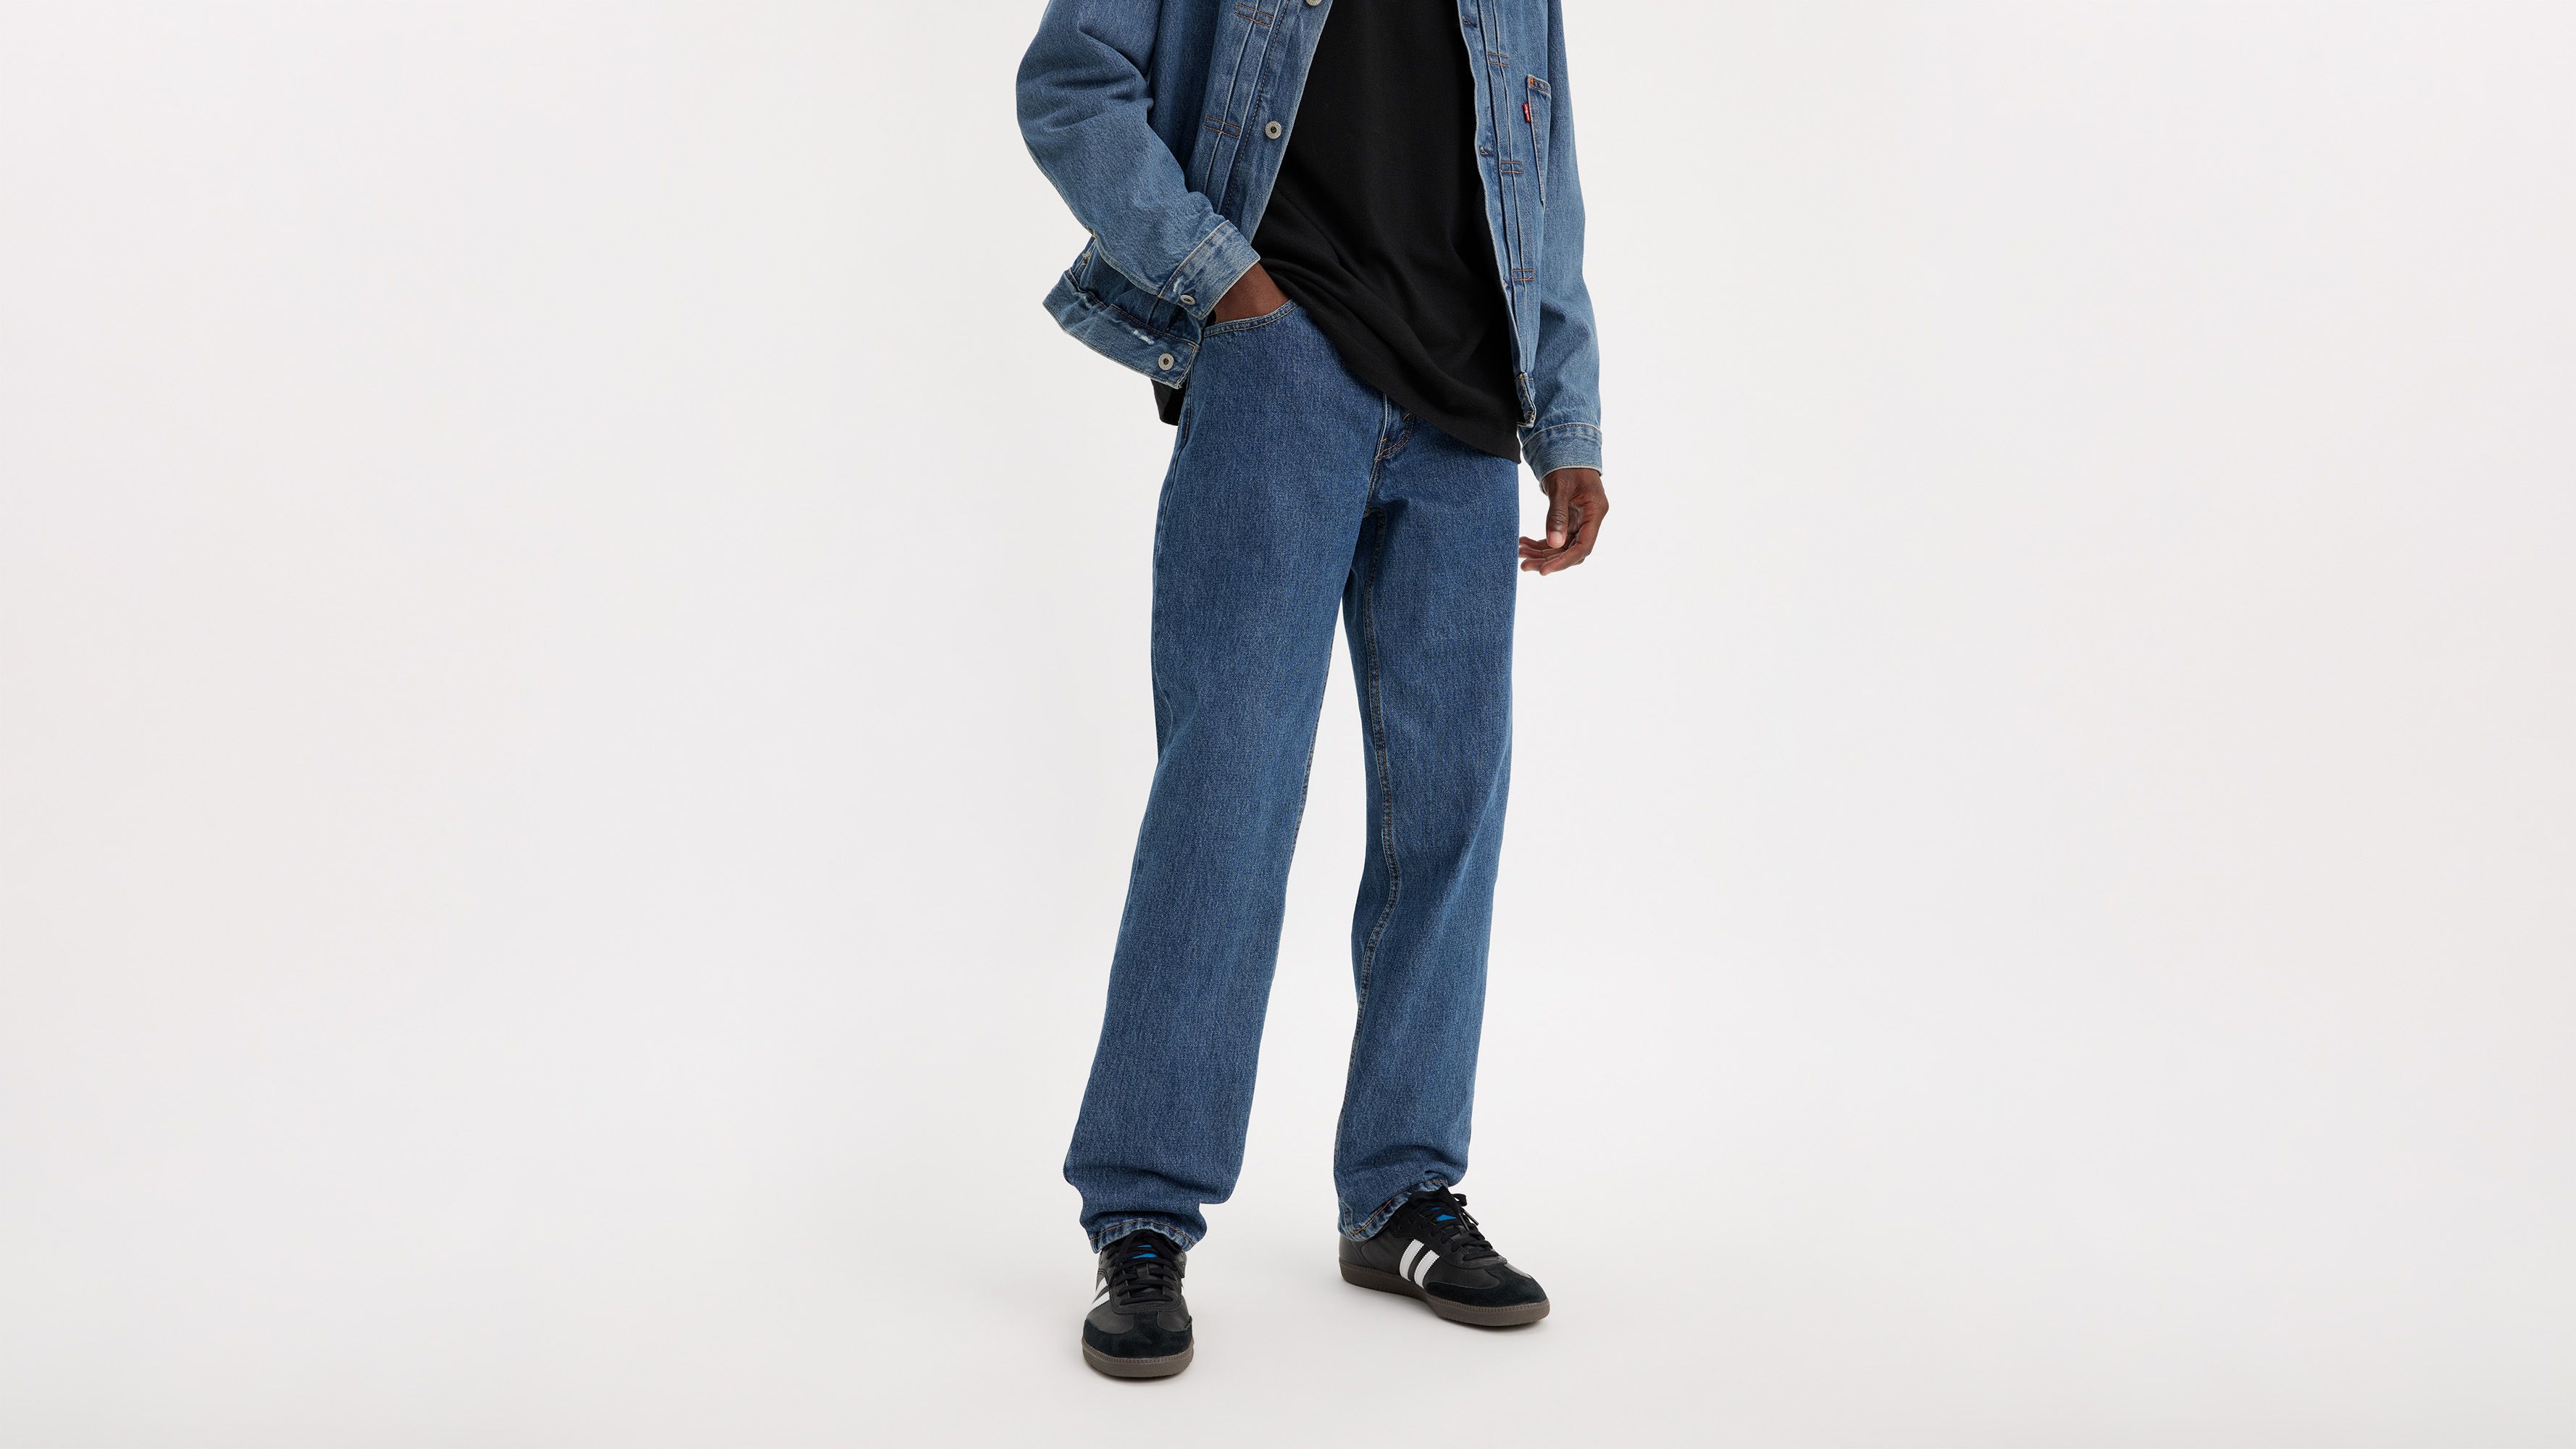 550™ Relaxed Fit Men's Jeans - Light Wash